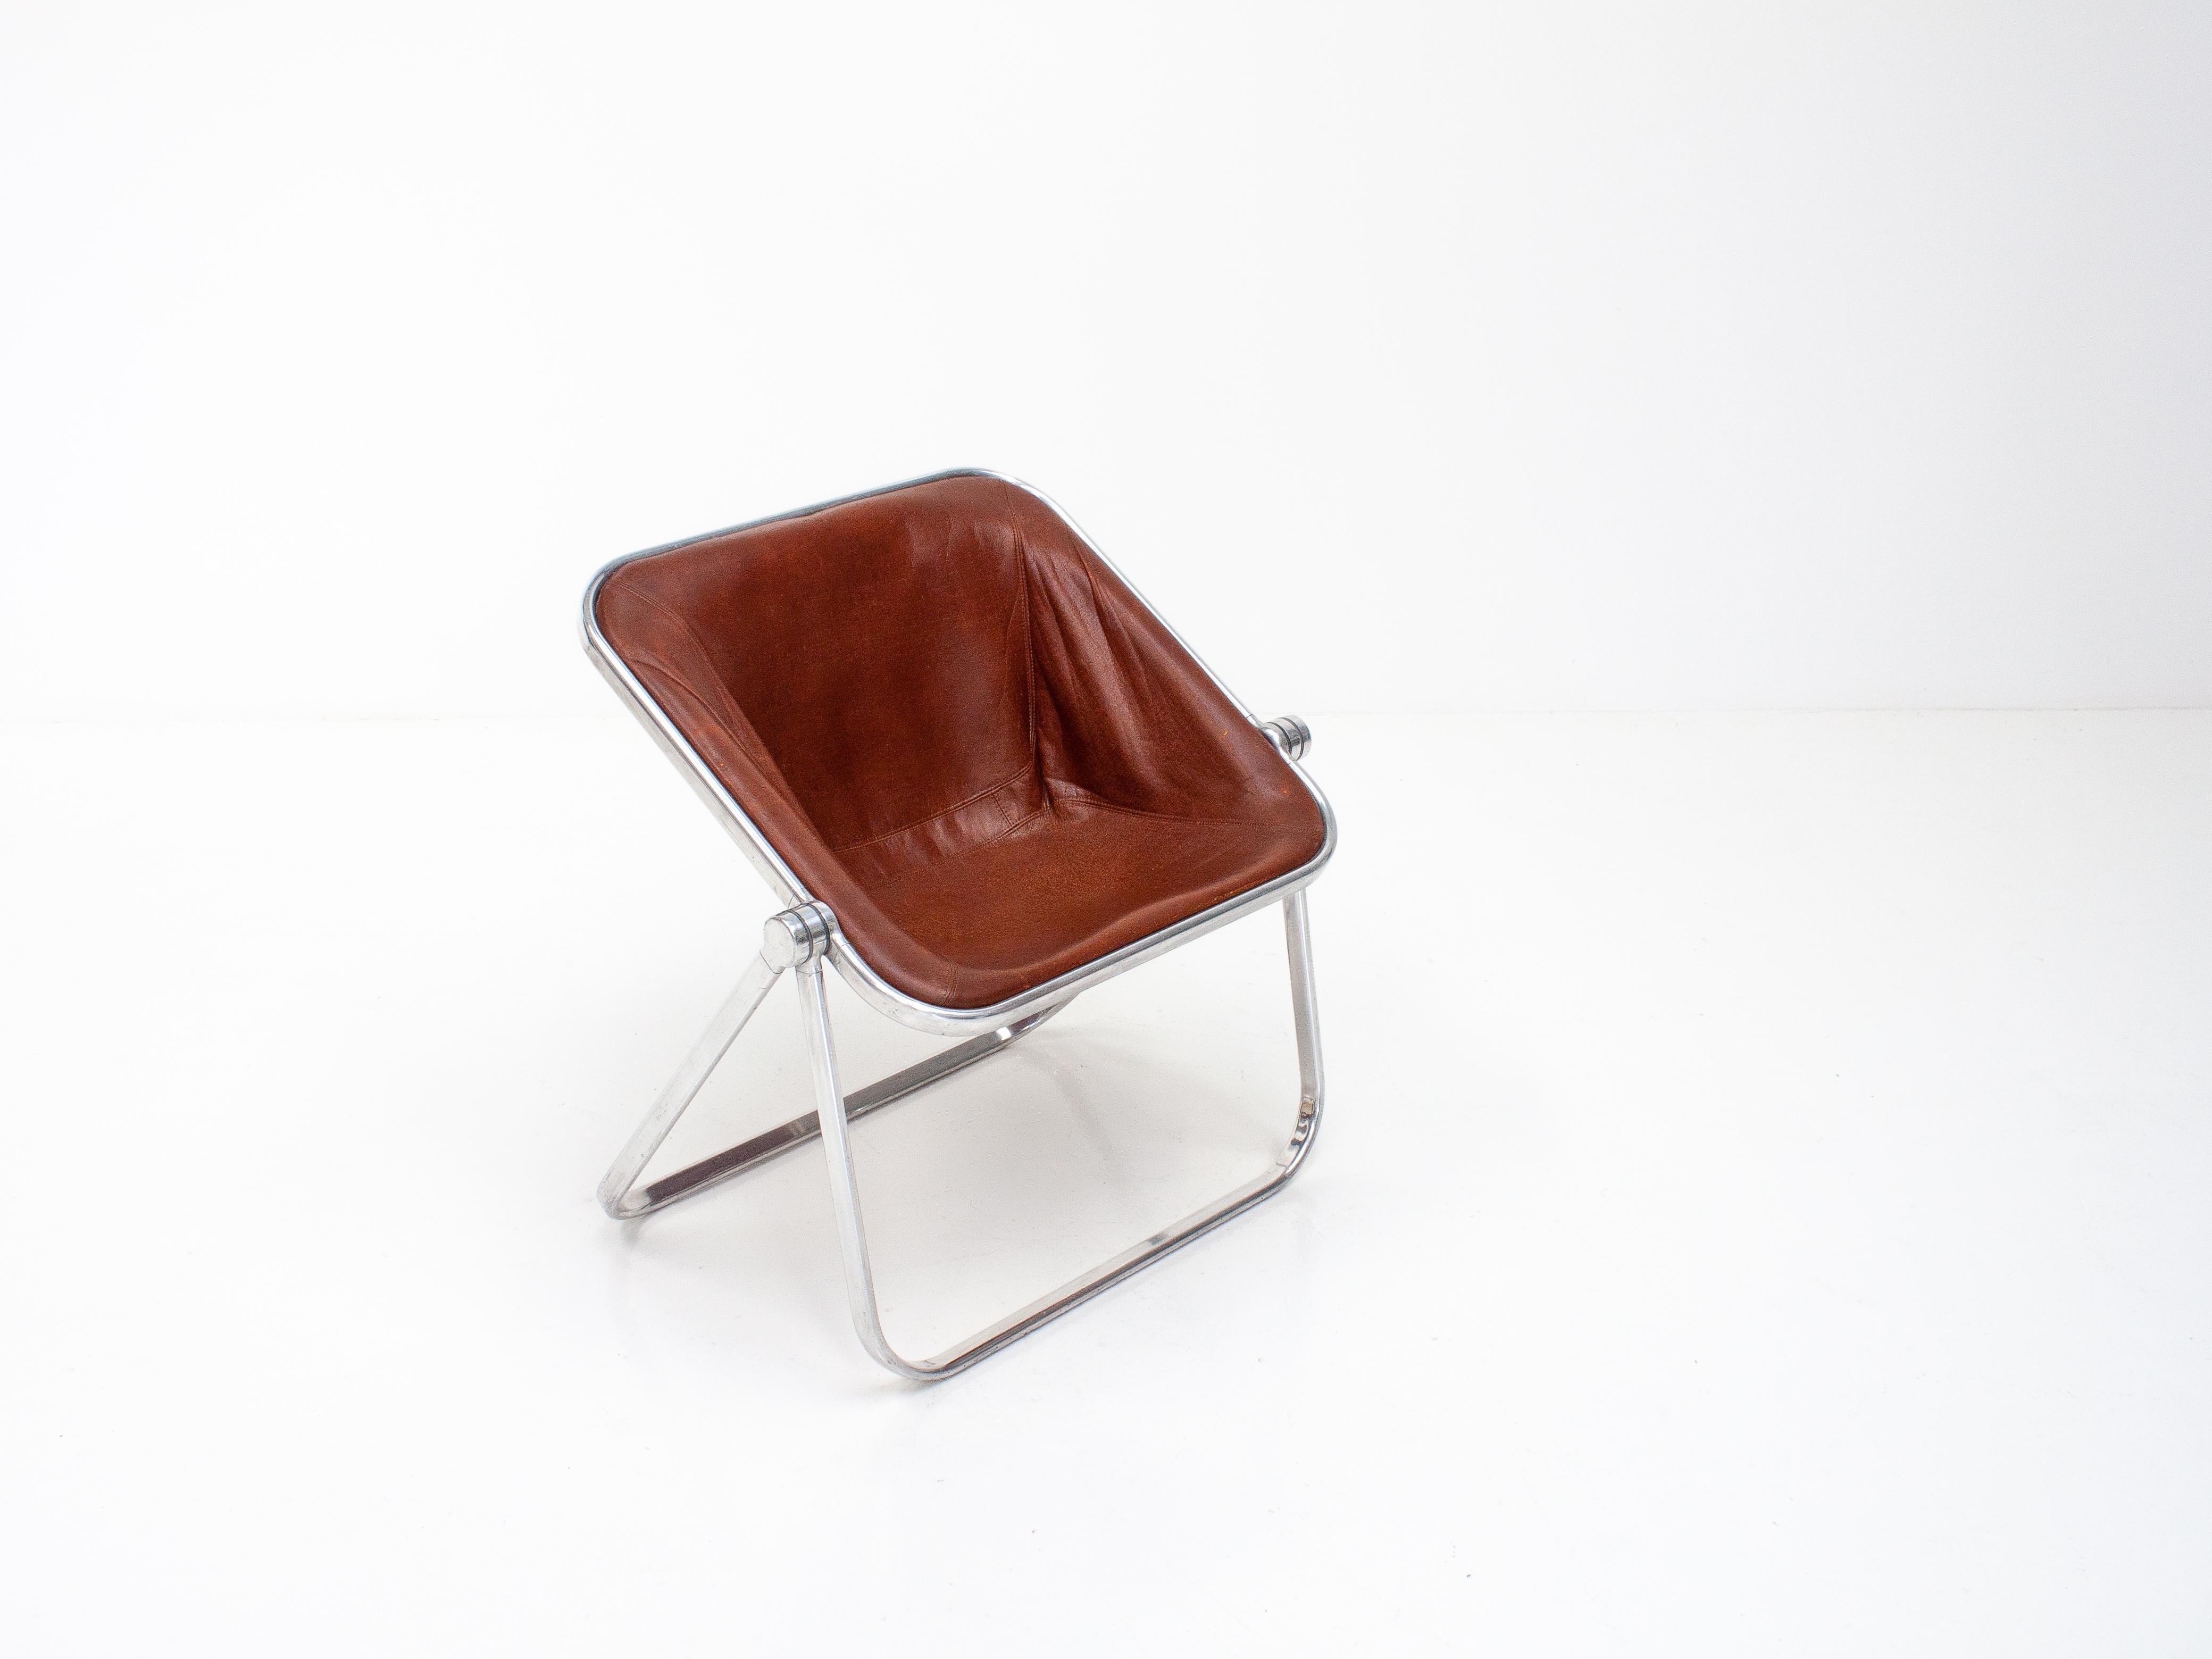 A Plona folding lounge chair designed by Giancarlo Piretti for Castelli in 1969, Italy.

Cognac coloured leather Plona chair with an aluminium folding frame. Labelled 